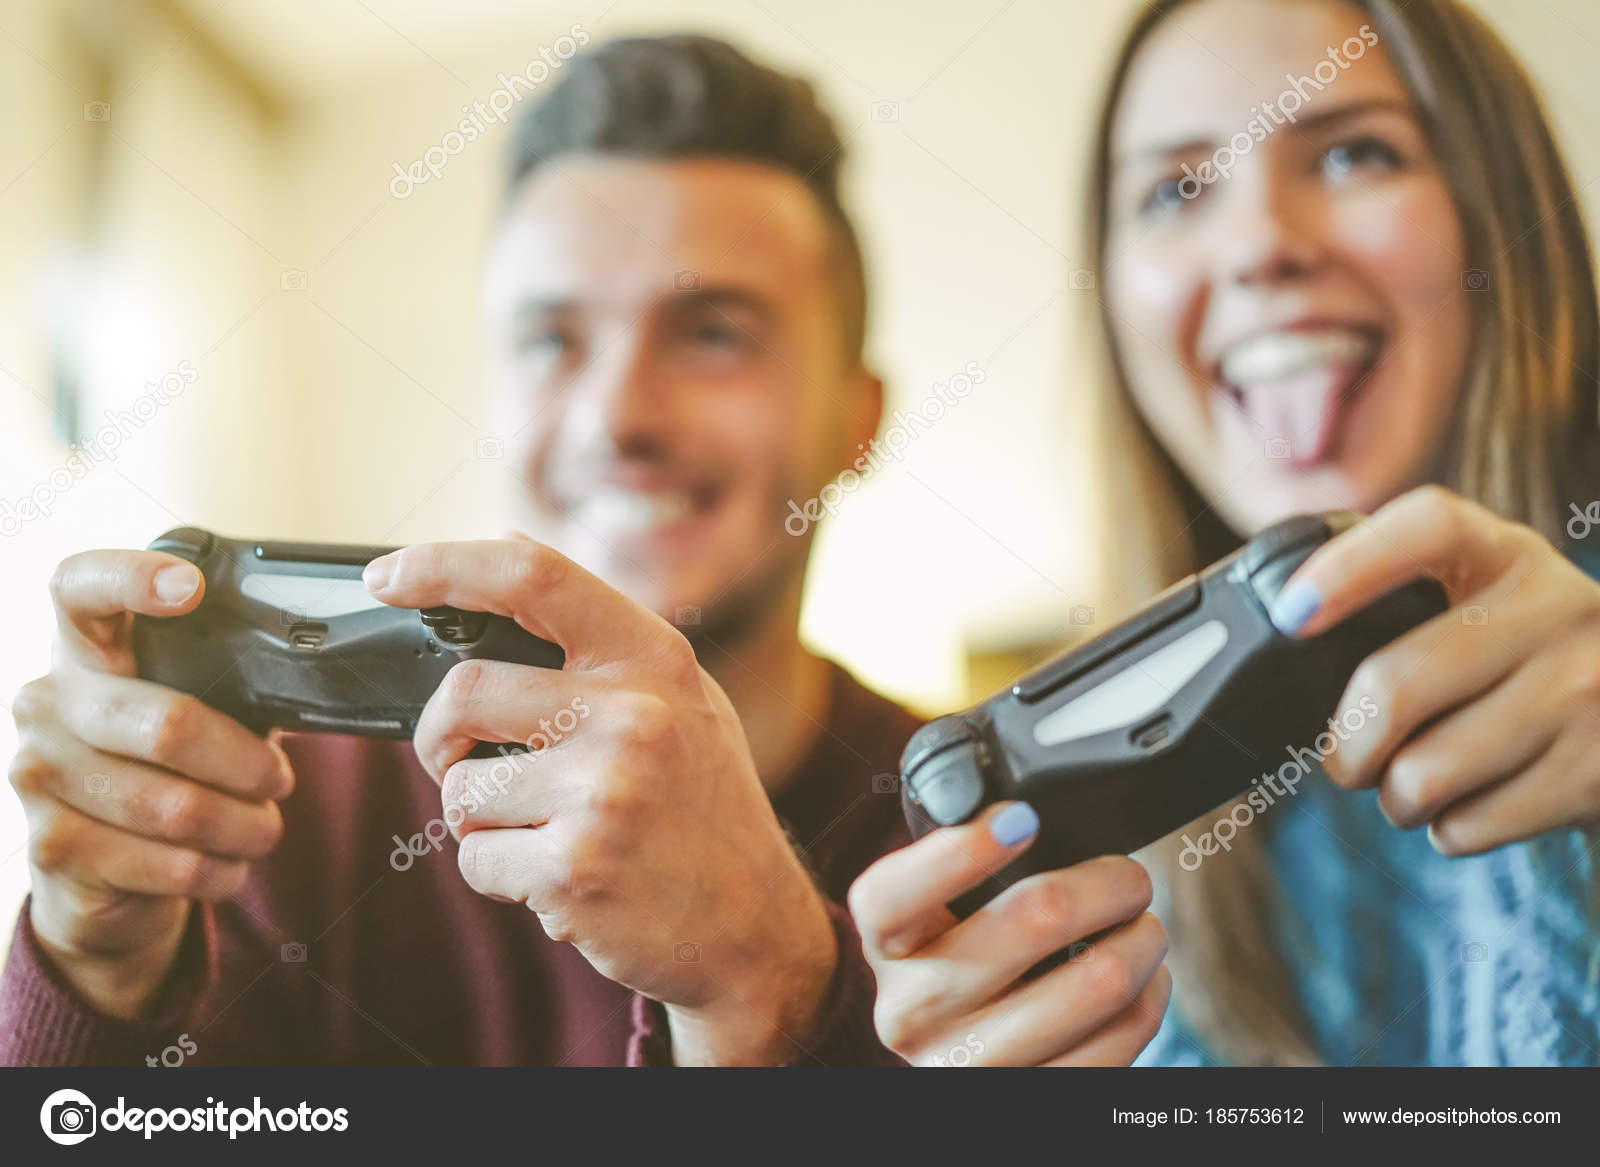 Happy Couple Sitting on the Sofa Playing Video Games, Using Controllers.  Competitive Girlfriend and Boyfriend in Love have Fun Playing in Online  Video Games at Home Together. Close-up Focus on Hands Stock